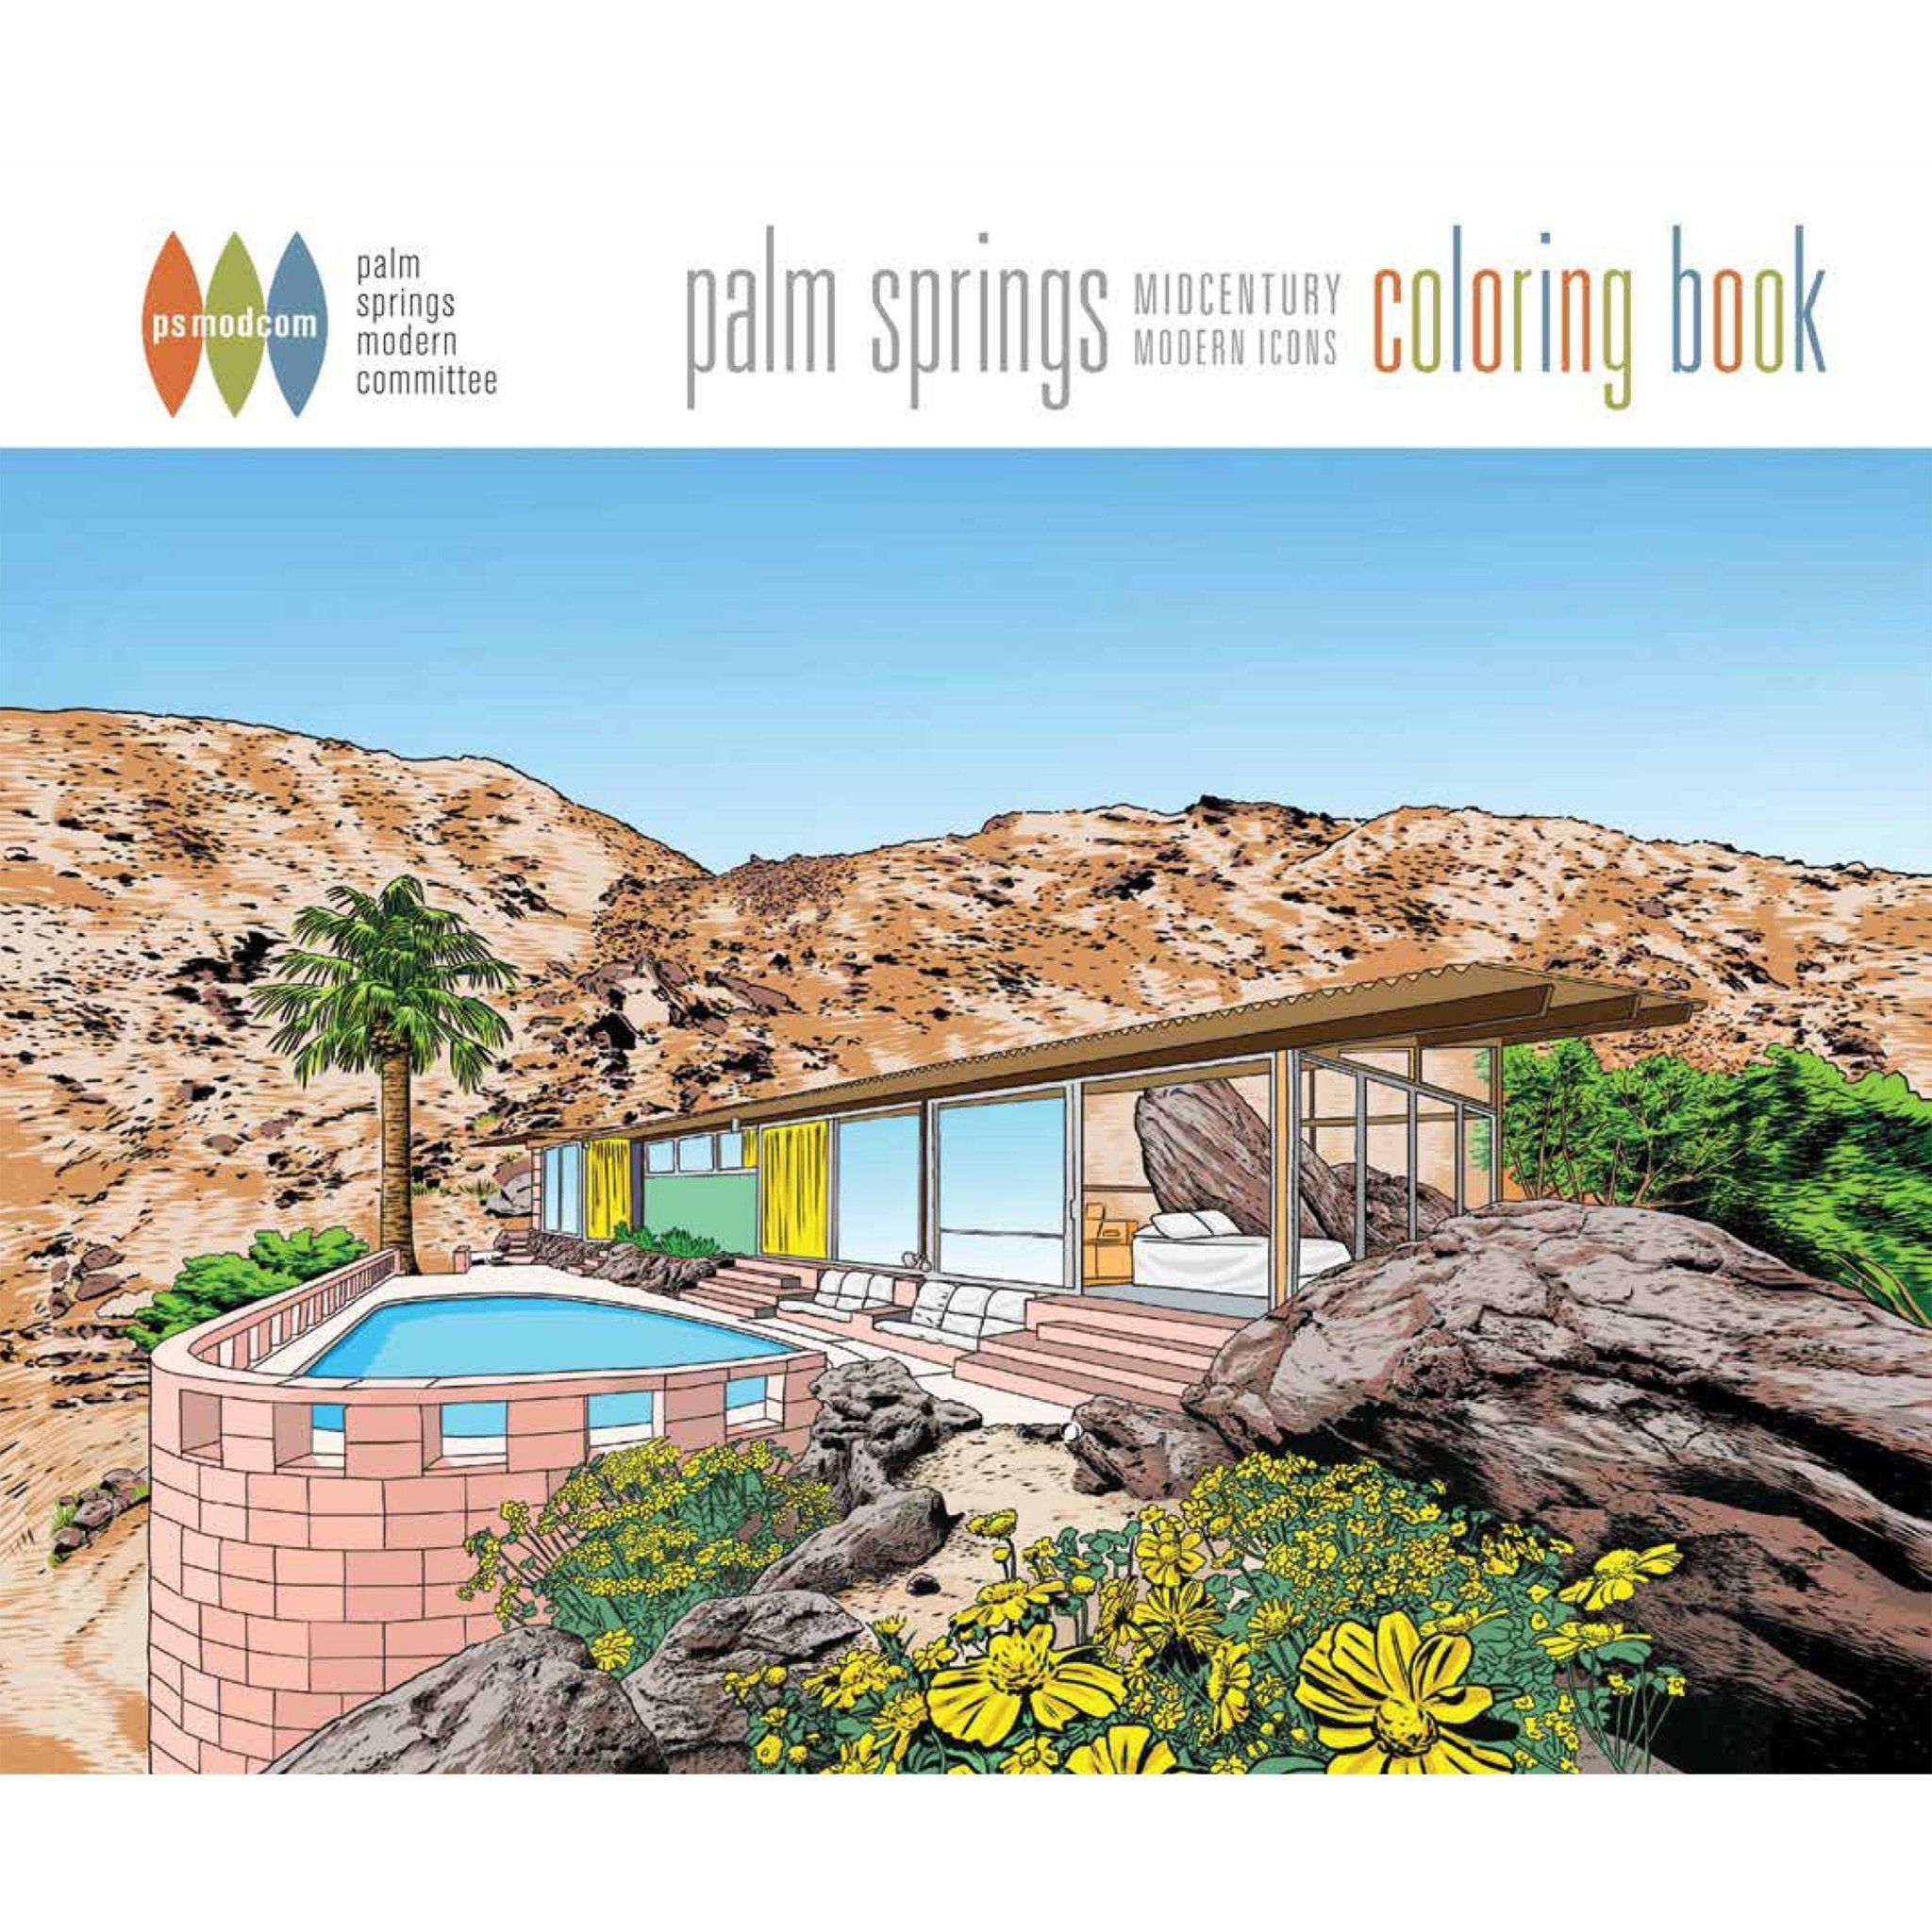 Palm Springs Midcentury Modern Icons Coloring Book - Destination PSP